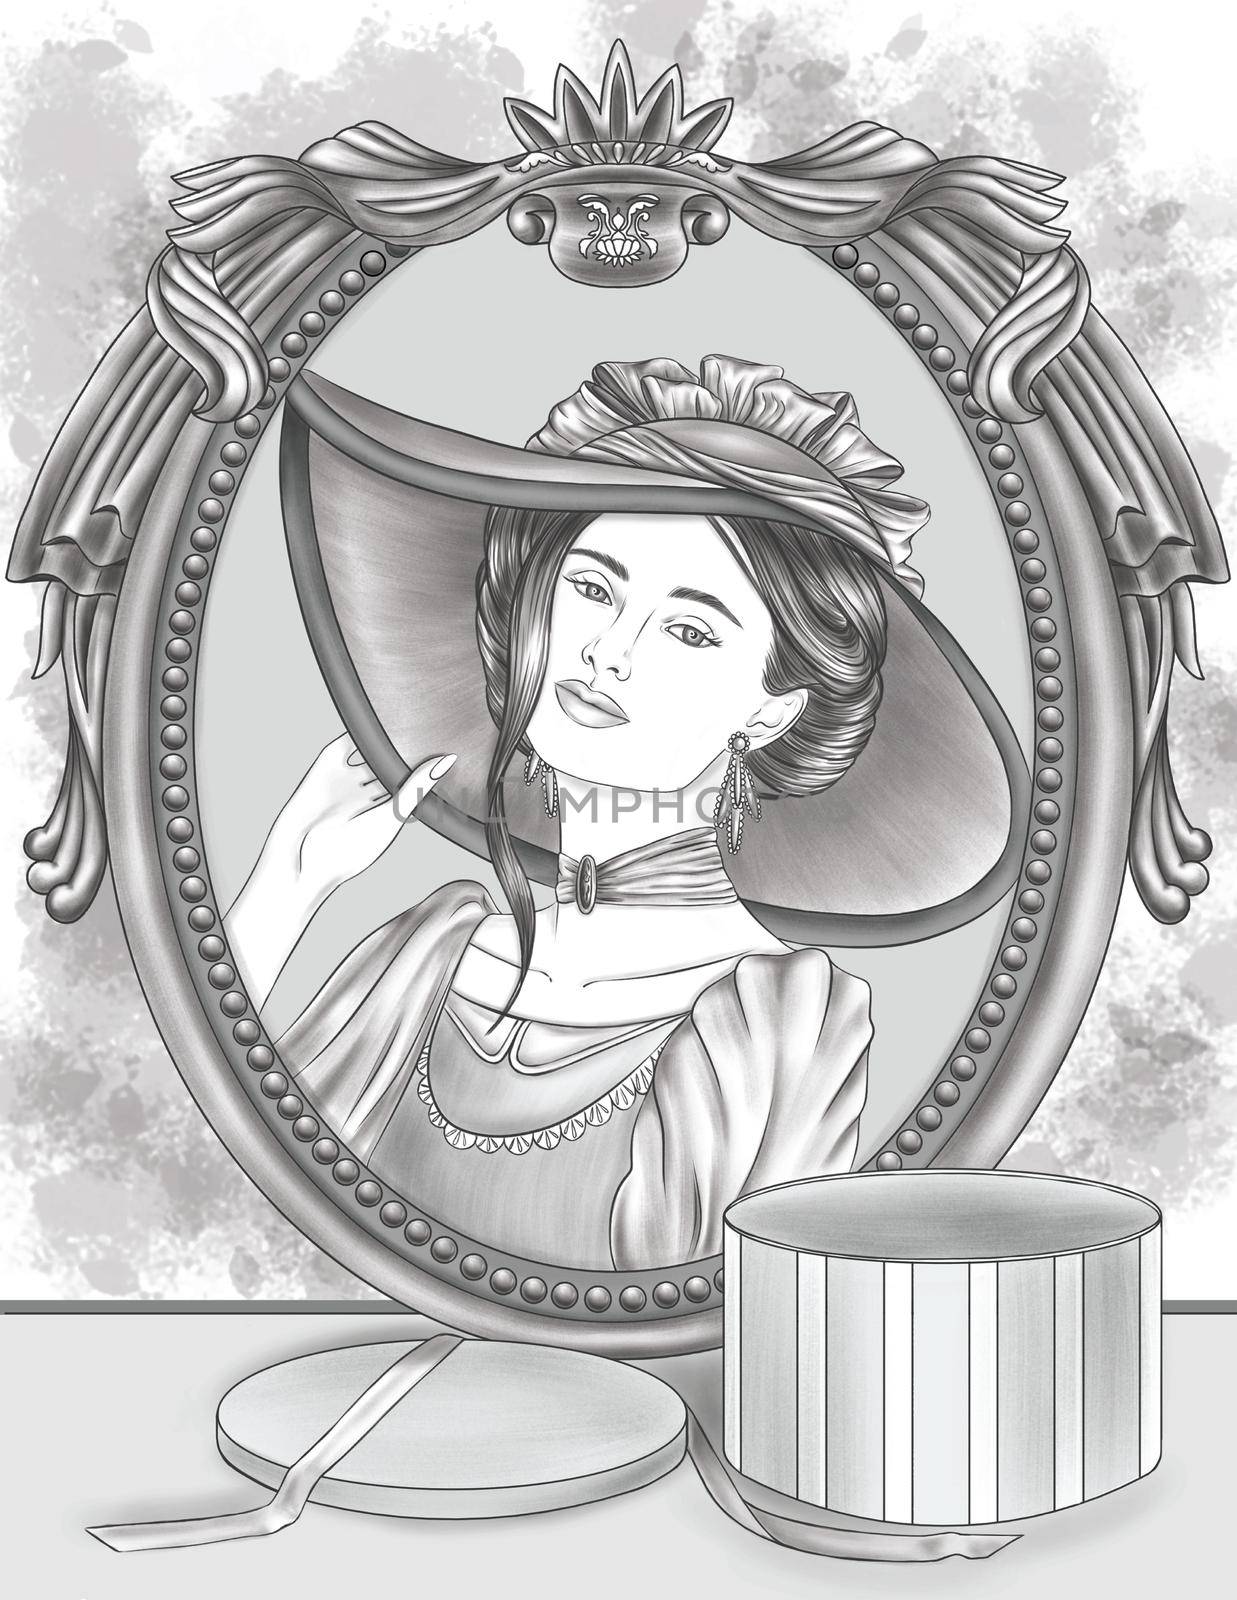 Lady In Dress Wearing Beautiful Hat Looking At The Mirror Admiring Face Colorless Line Drawing. Woman In Beautiful Gown Wears Headpiece Facing Reflection Coloring Book Page. by nialowwa